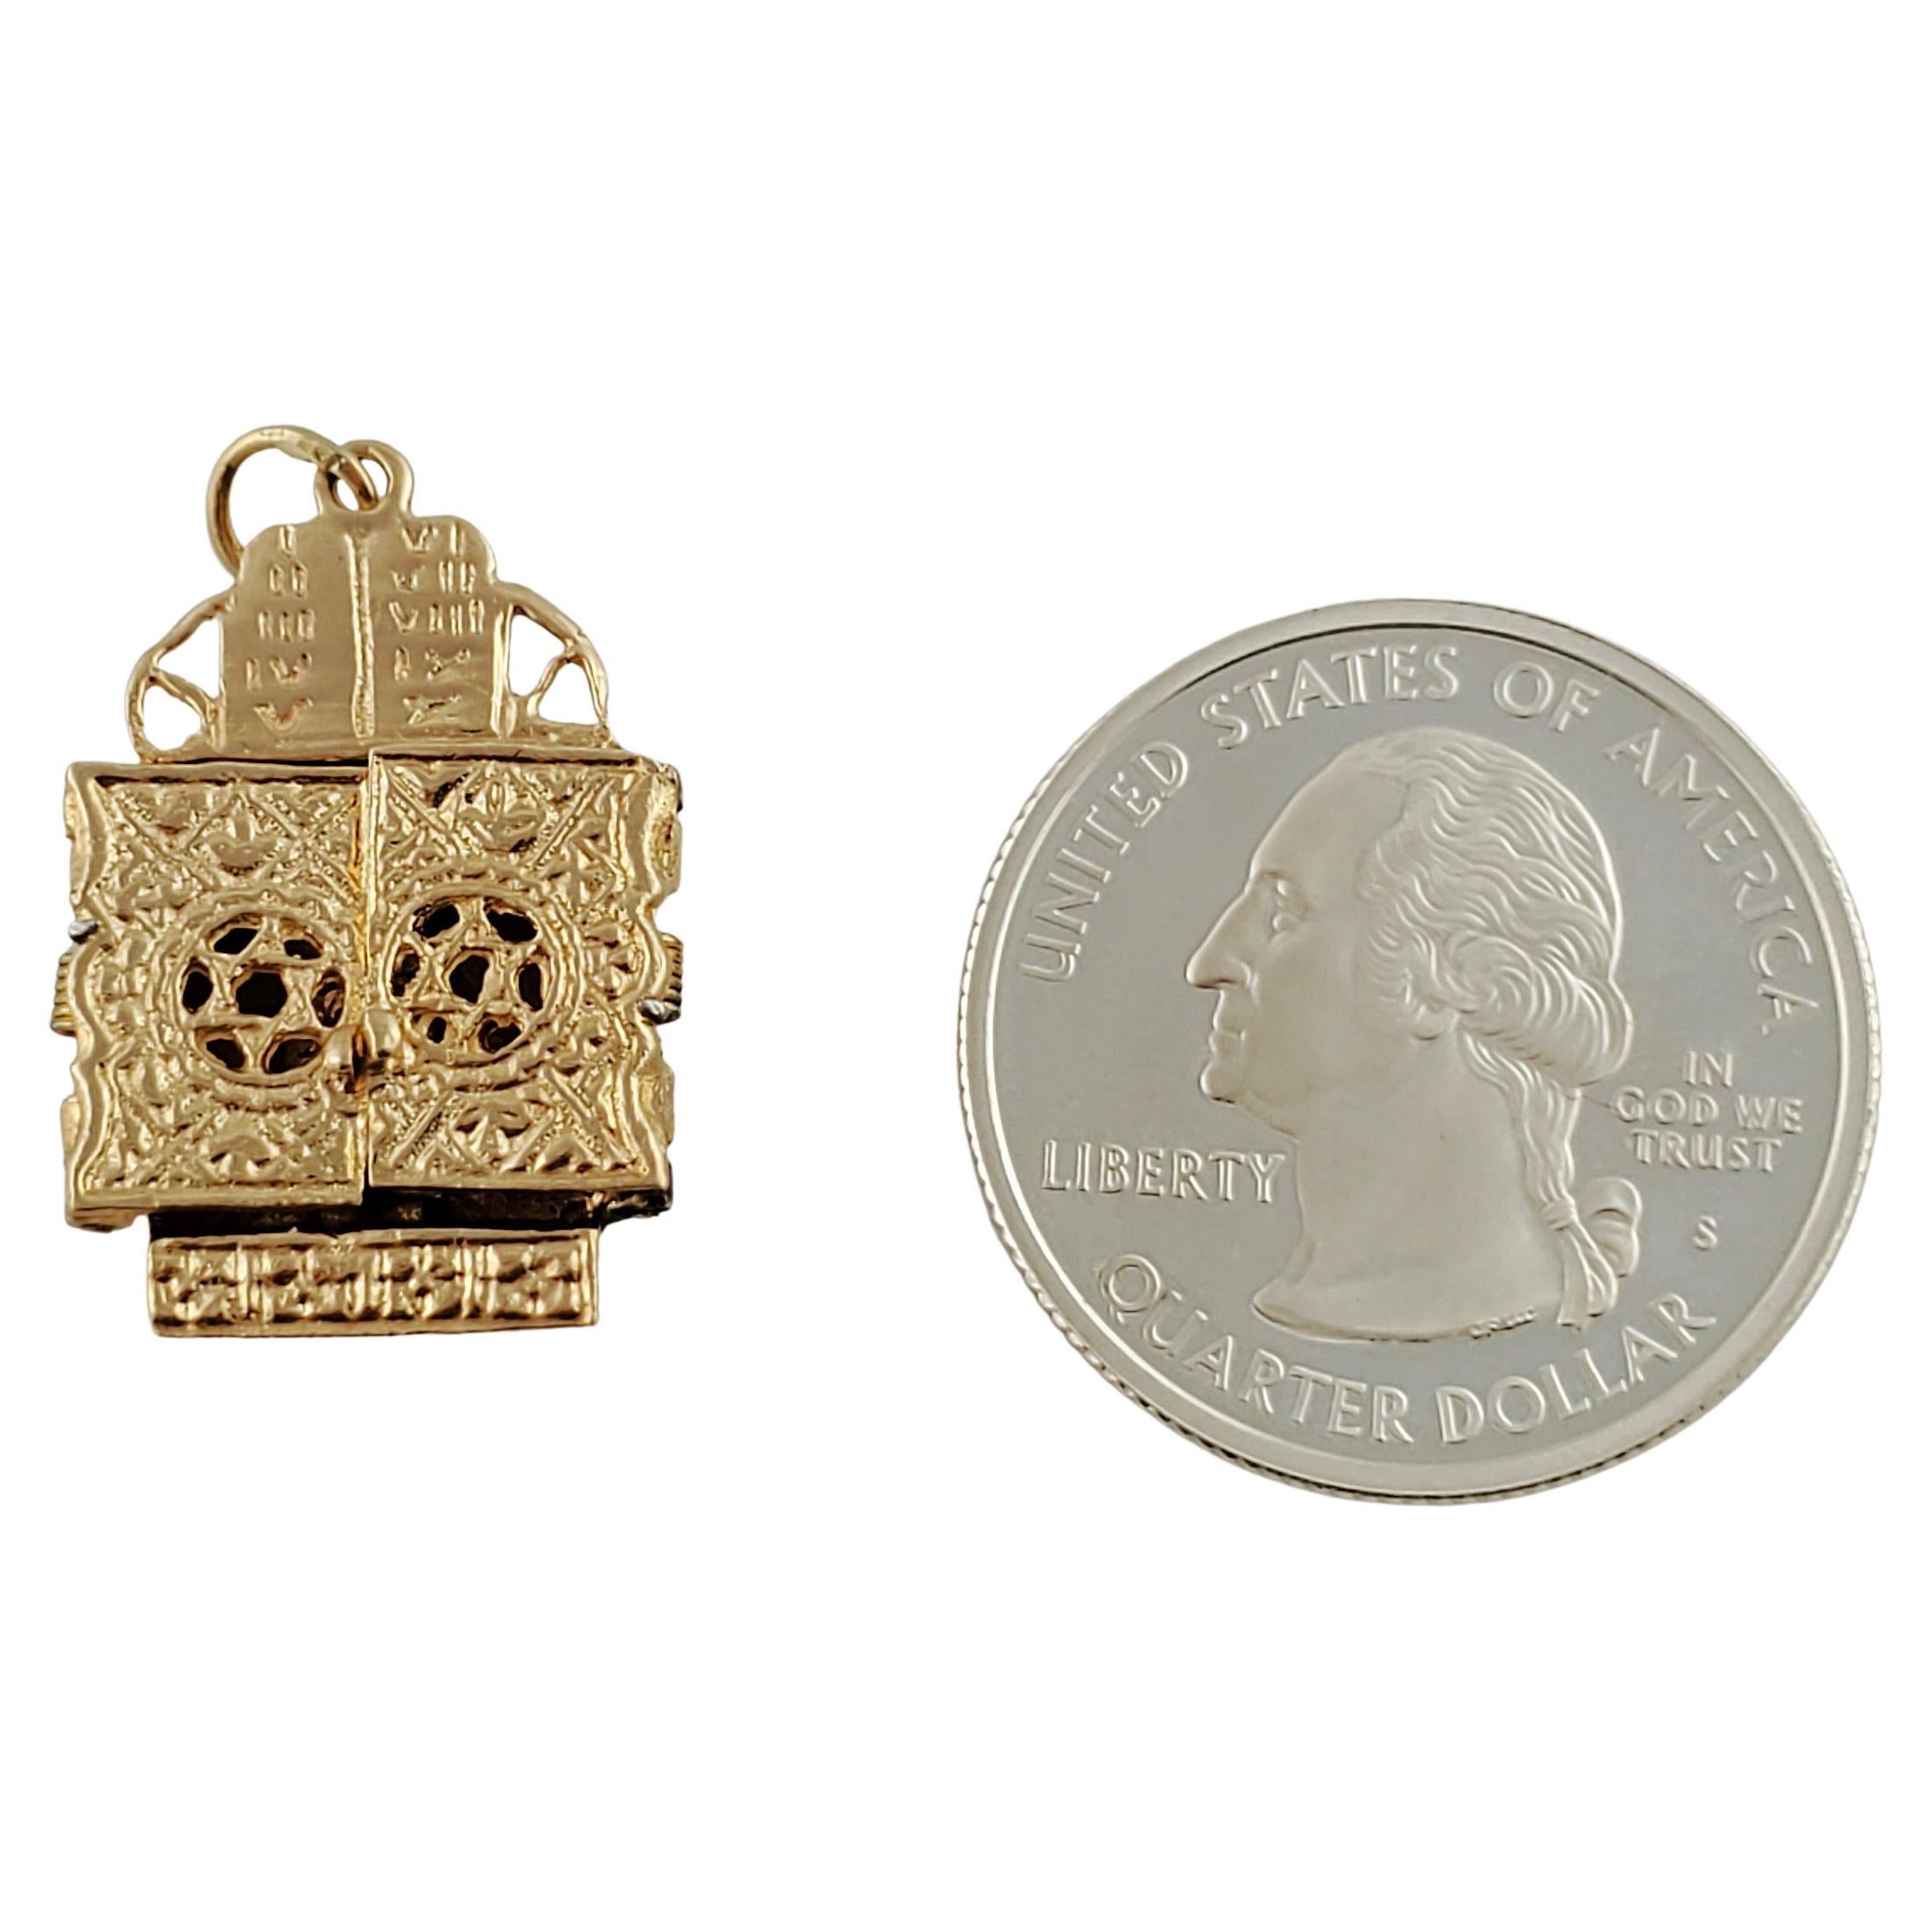 Vintage 14K Yellow Gold Tabernacle Charm

Beautiful tabernacle charm detailed in 14K gold.

Size: 22.91mm X 15.9mm

Weight: 5.5 gr / 3.5 dwt

Hallmark: 14K

Very good condition, professionally polished.

Will come packaged in a gift box and will be